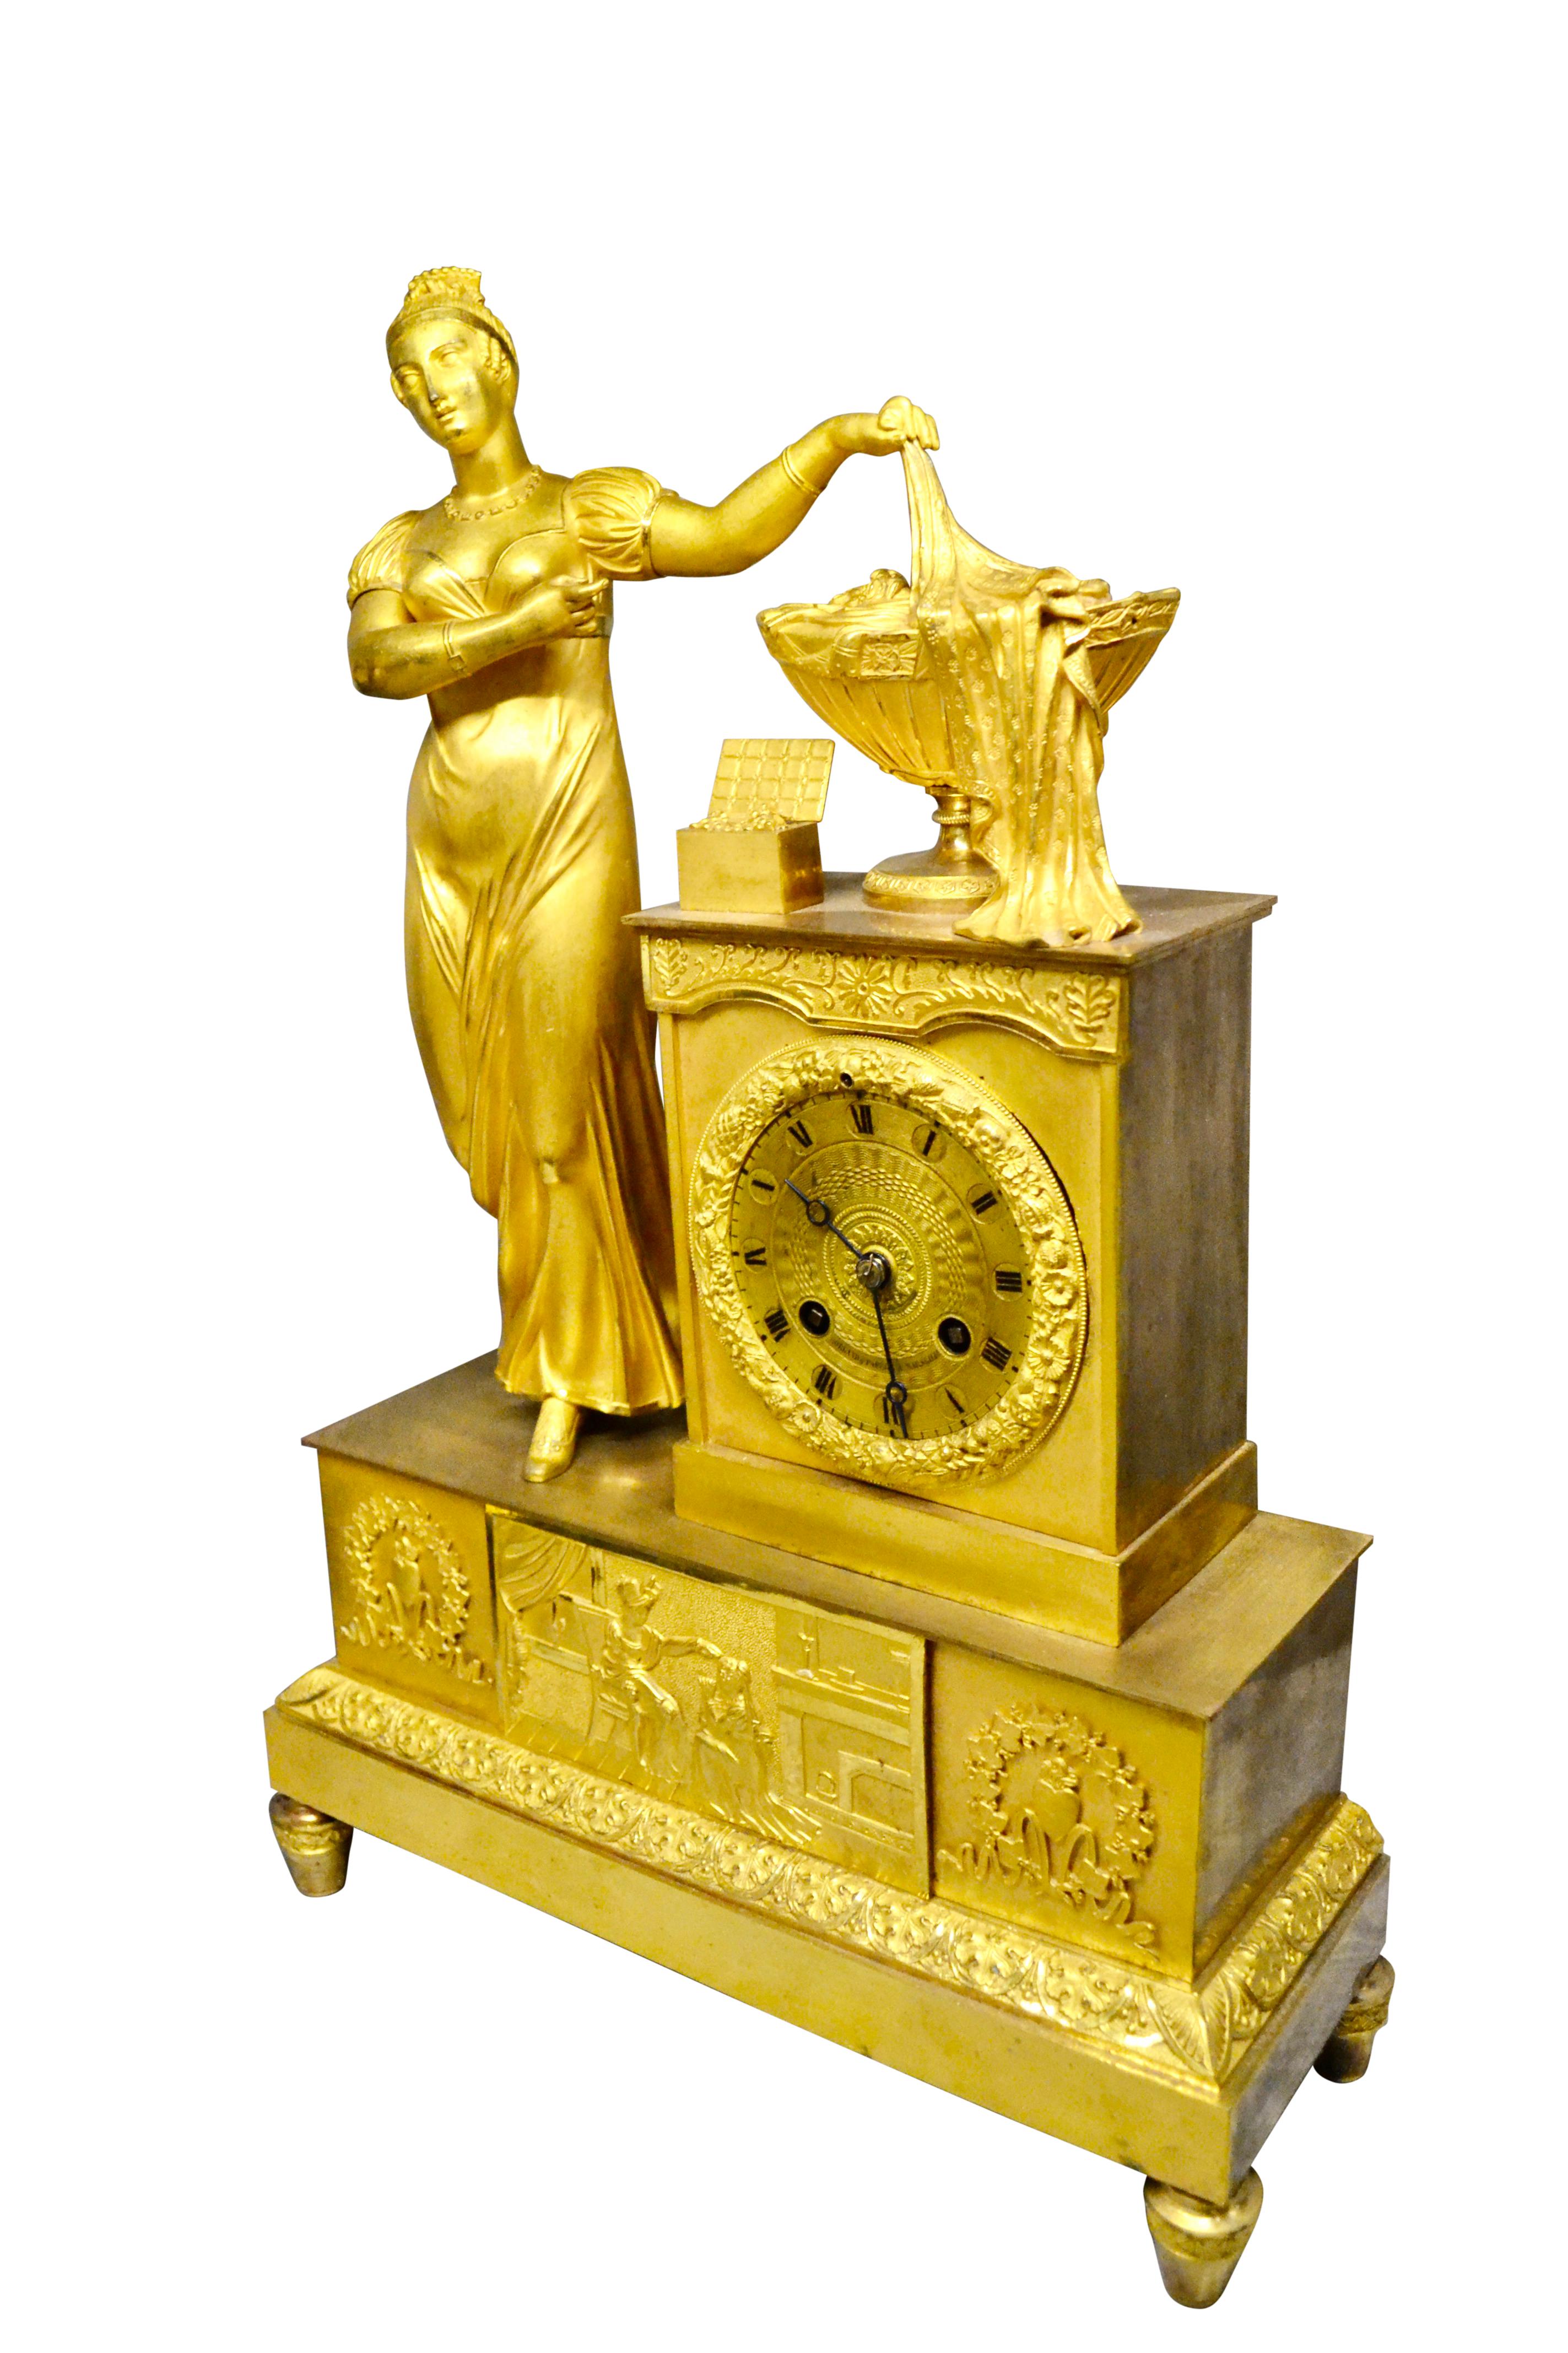 A late French Empire mantle clock in gilded bronze depicting a standing classical lady on the left side of the clock plinth with her left arm outstretched holding drapery concealing the contents of a gilded urn. The urn contains numerous items